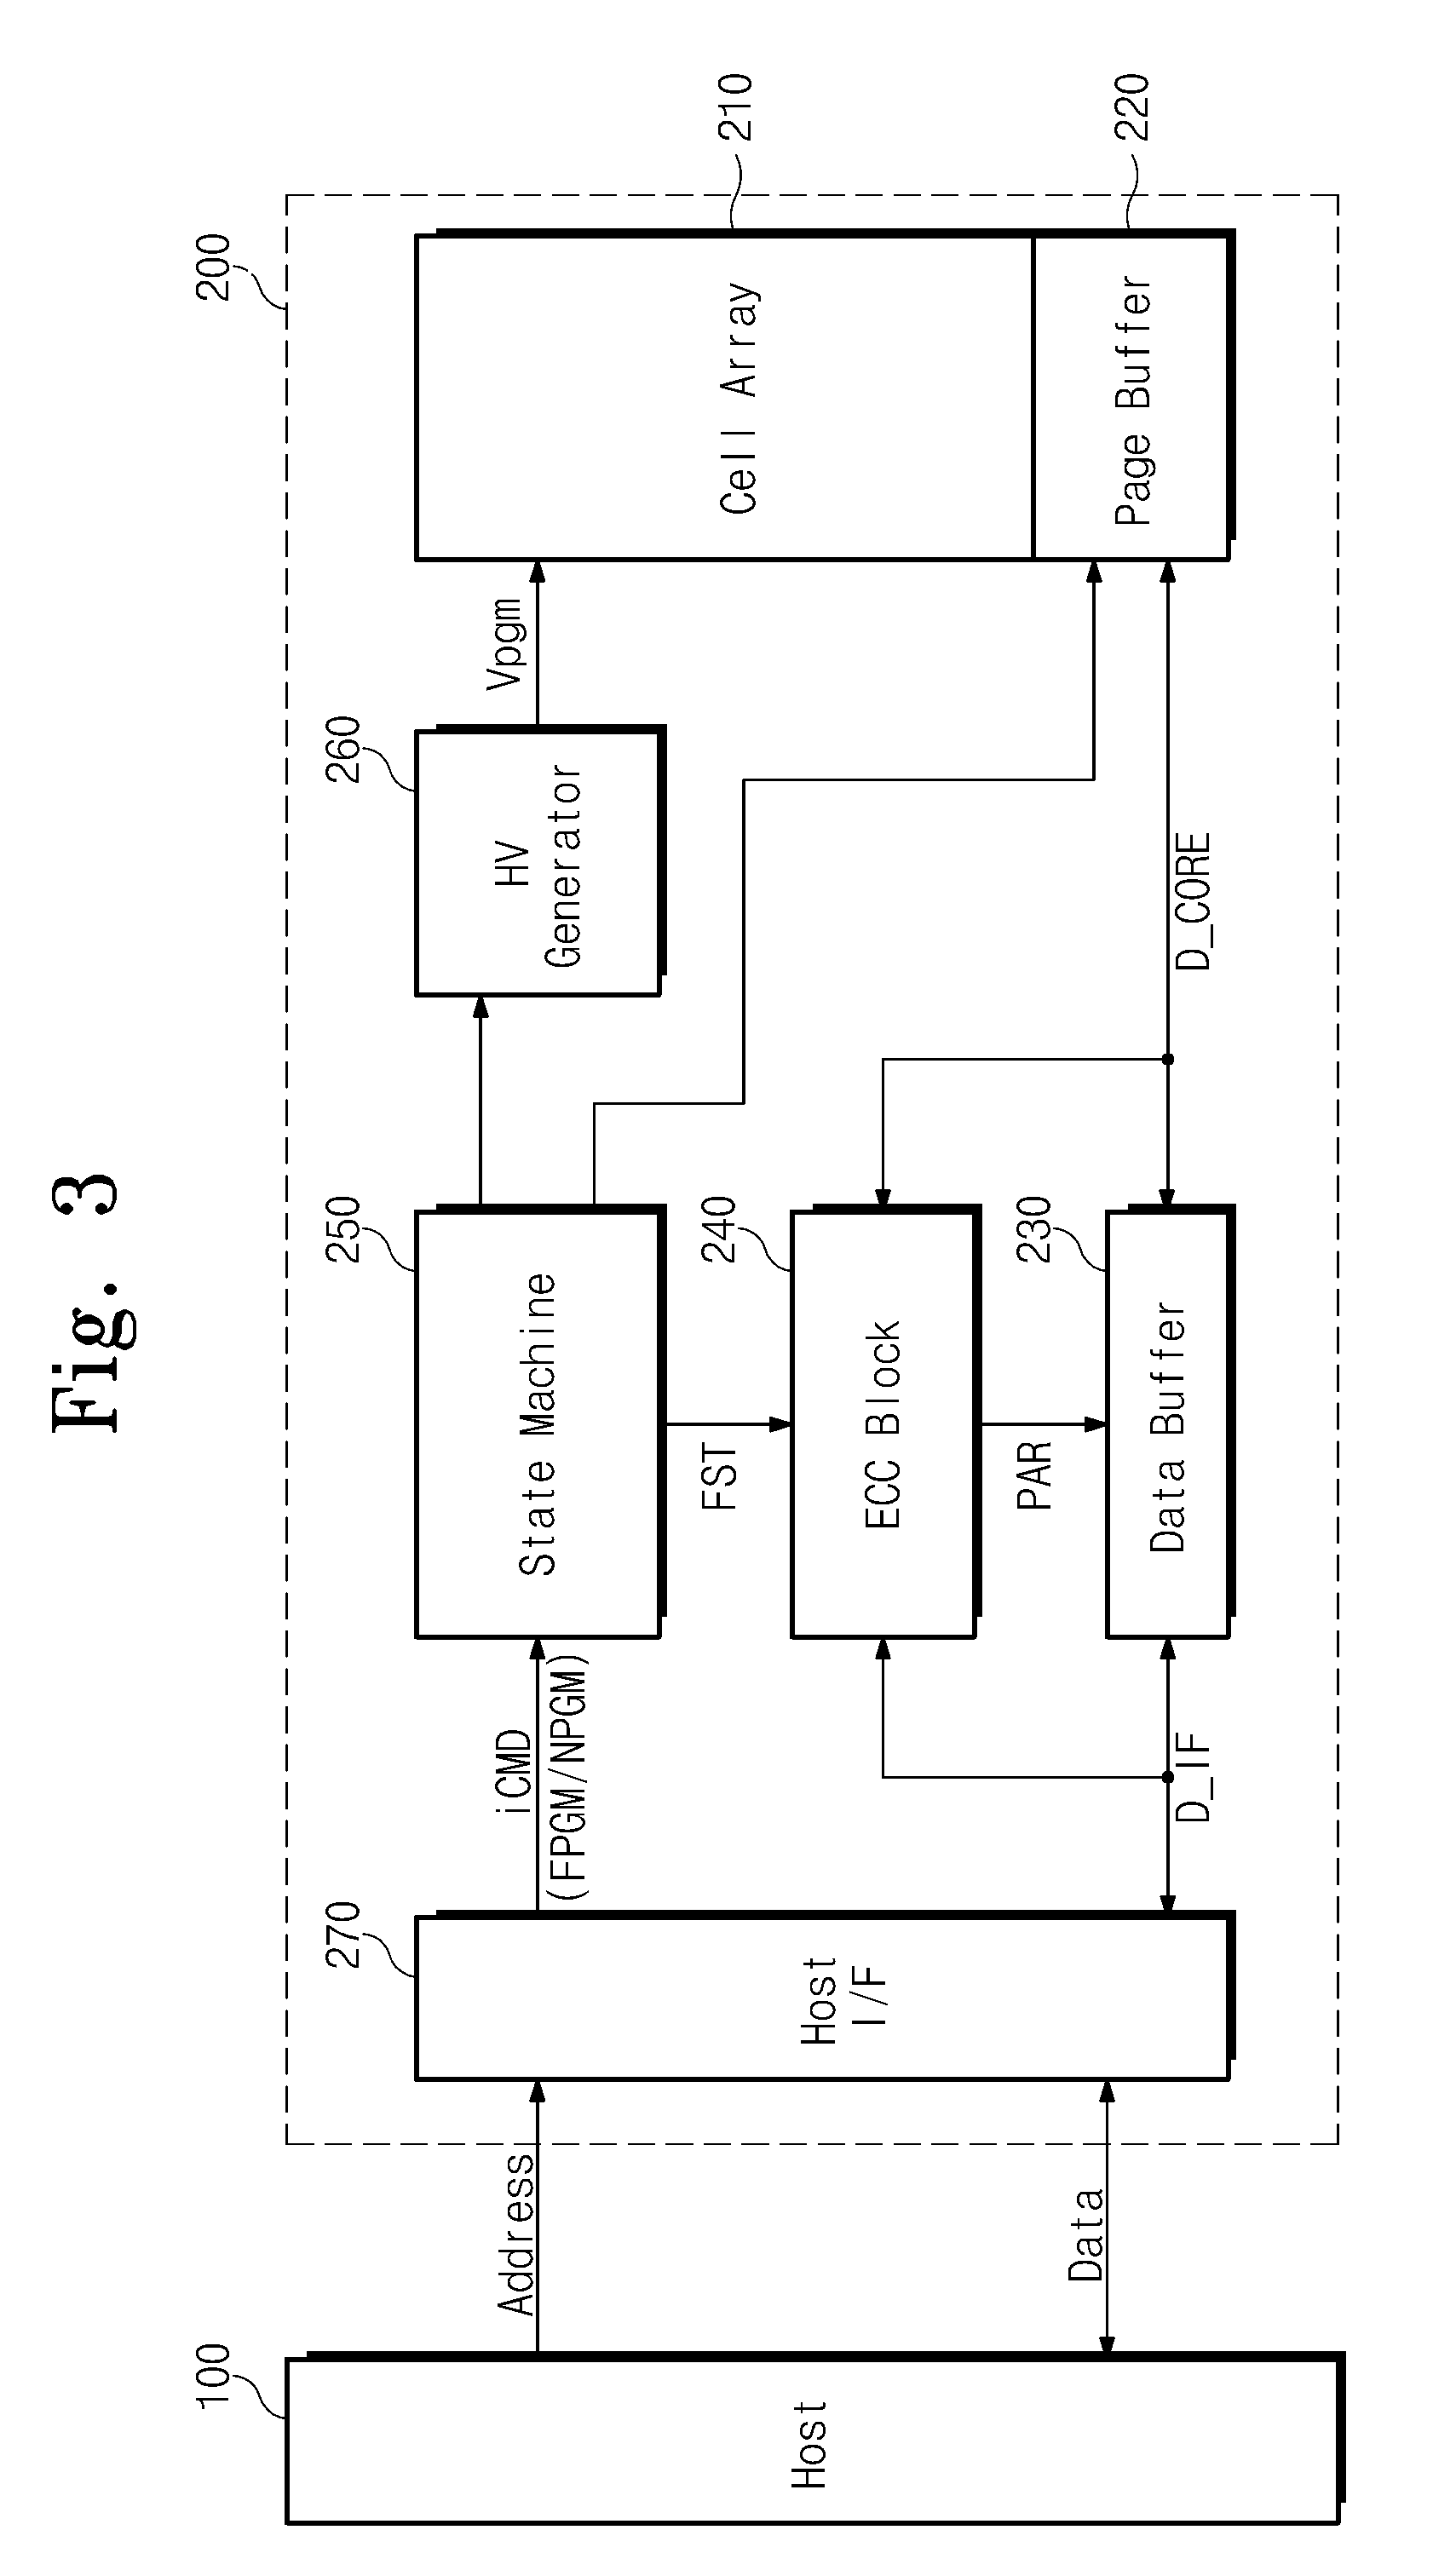 Nonvolatile memory device, system, and method providing fast program and read operations